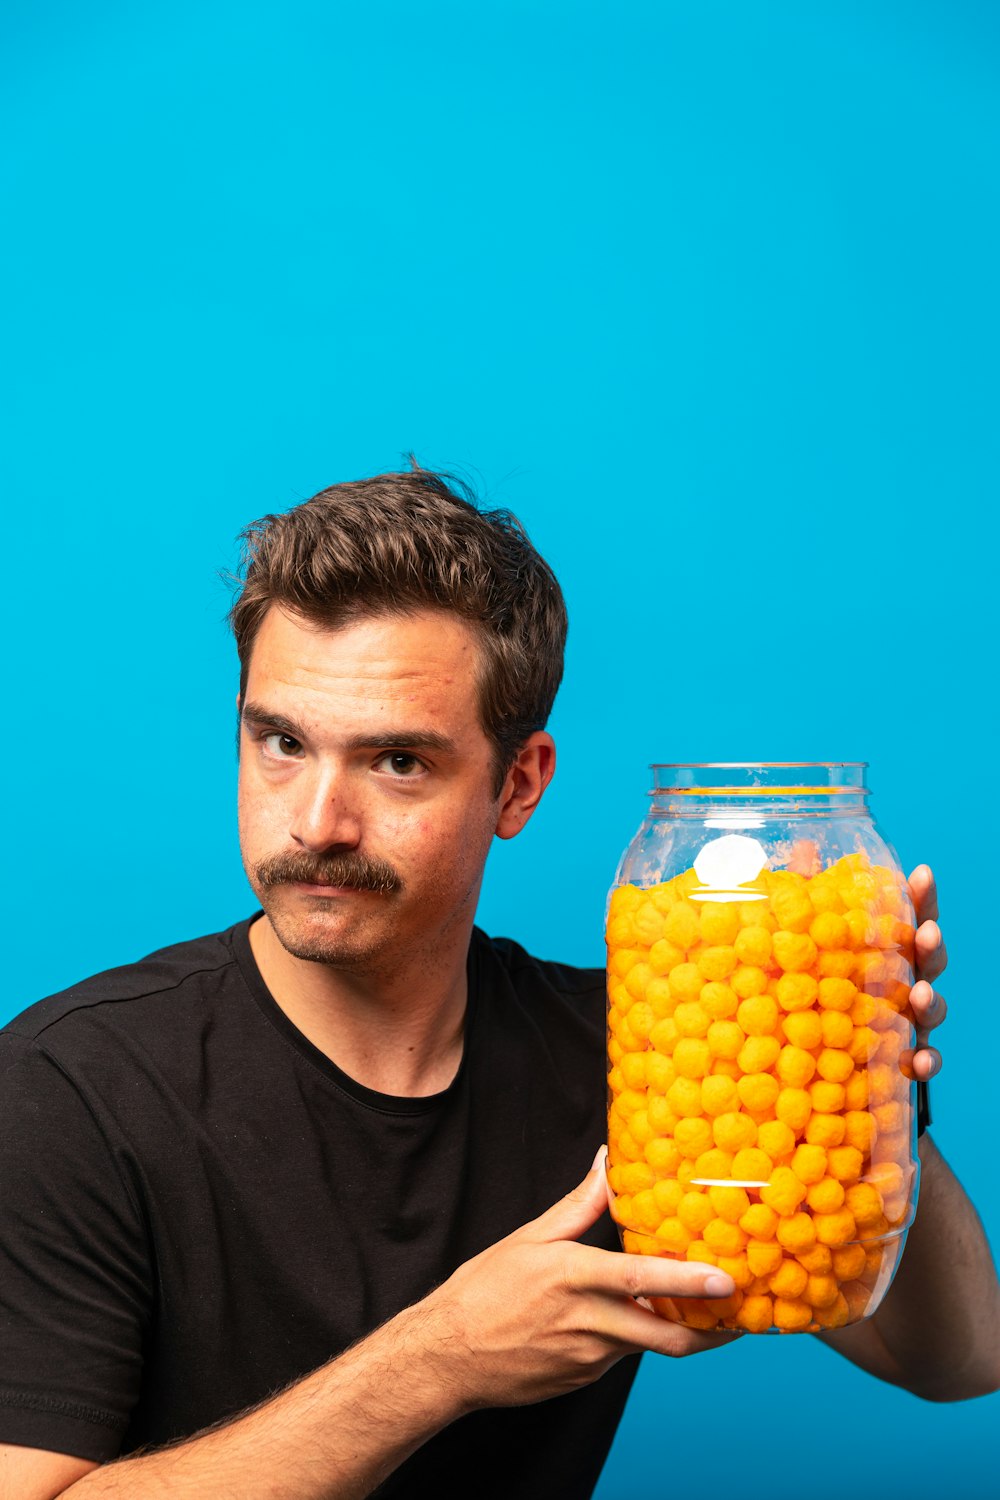 a man holding a container of oranges